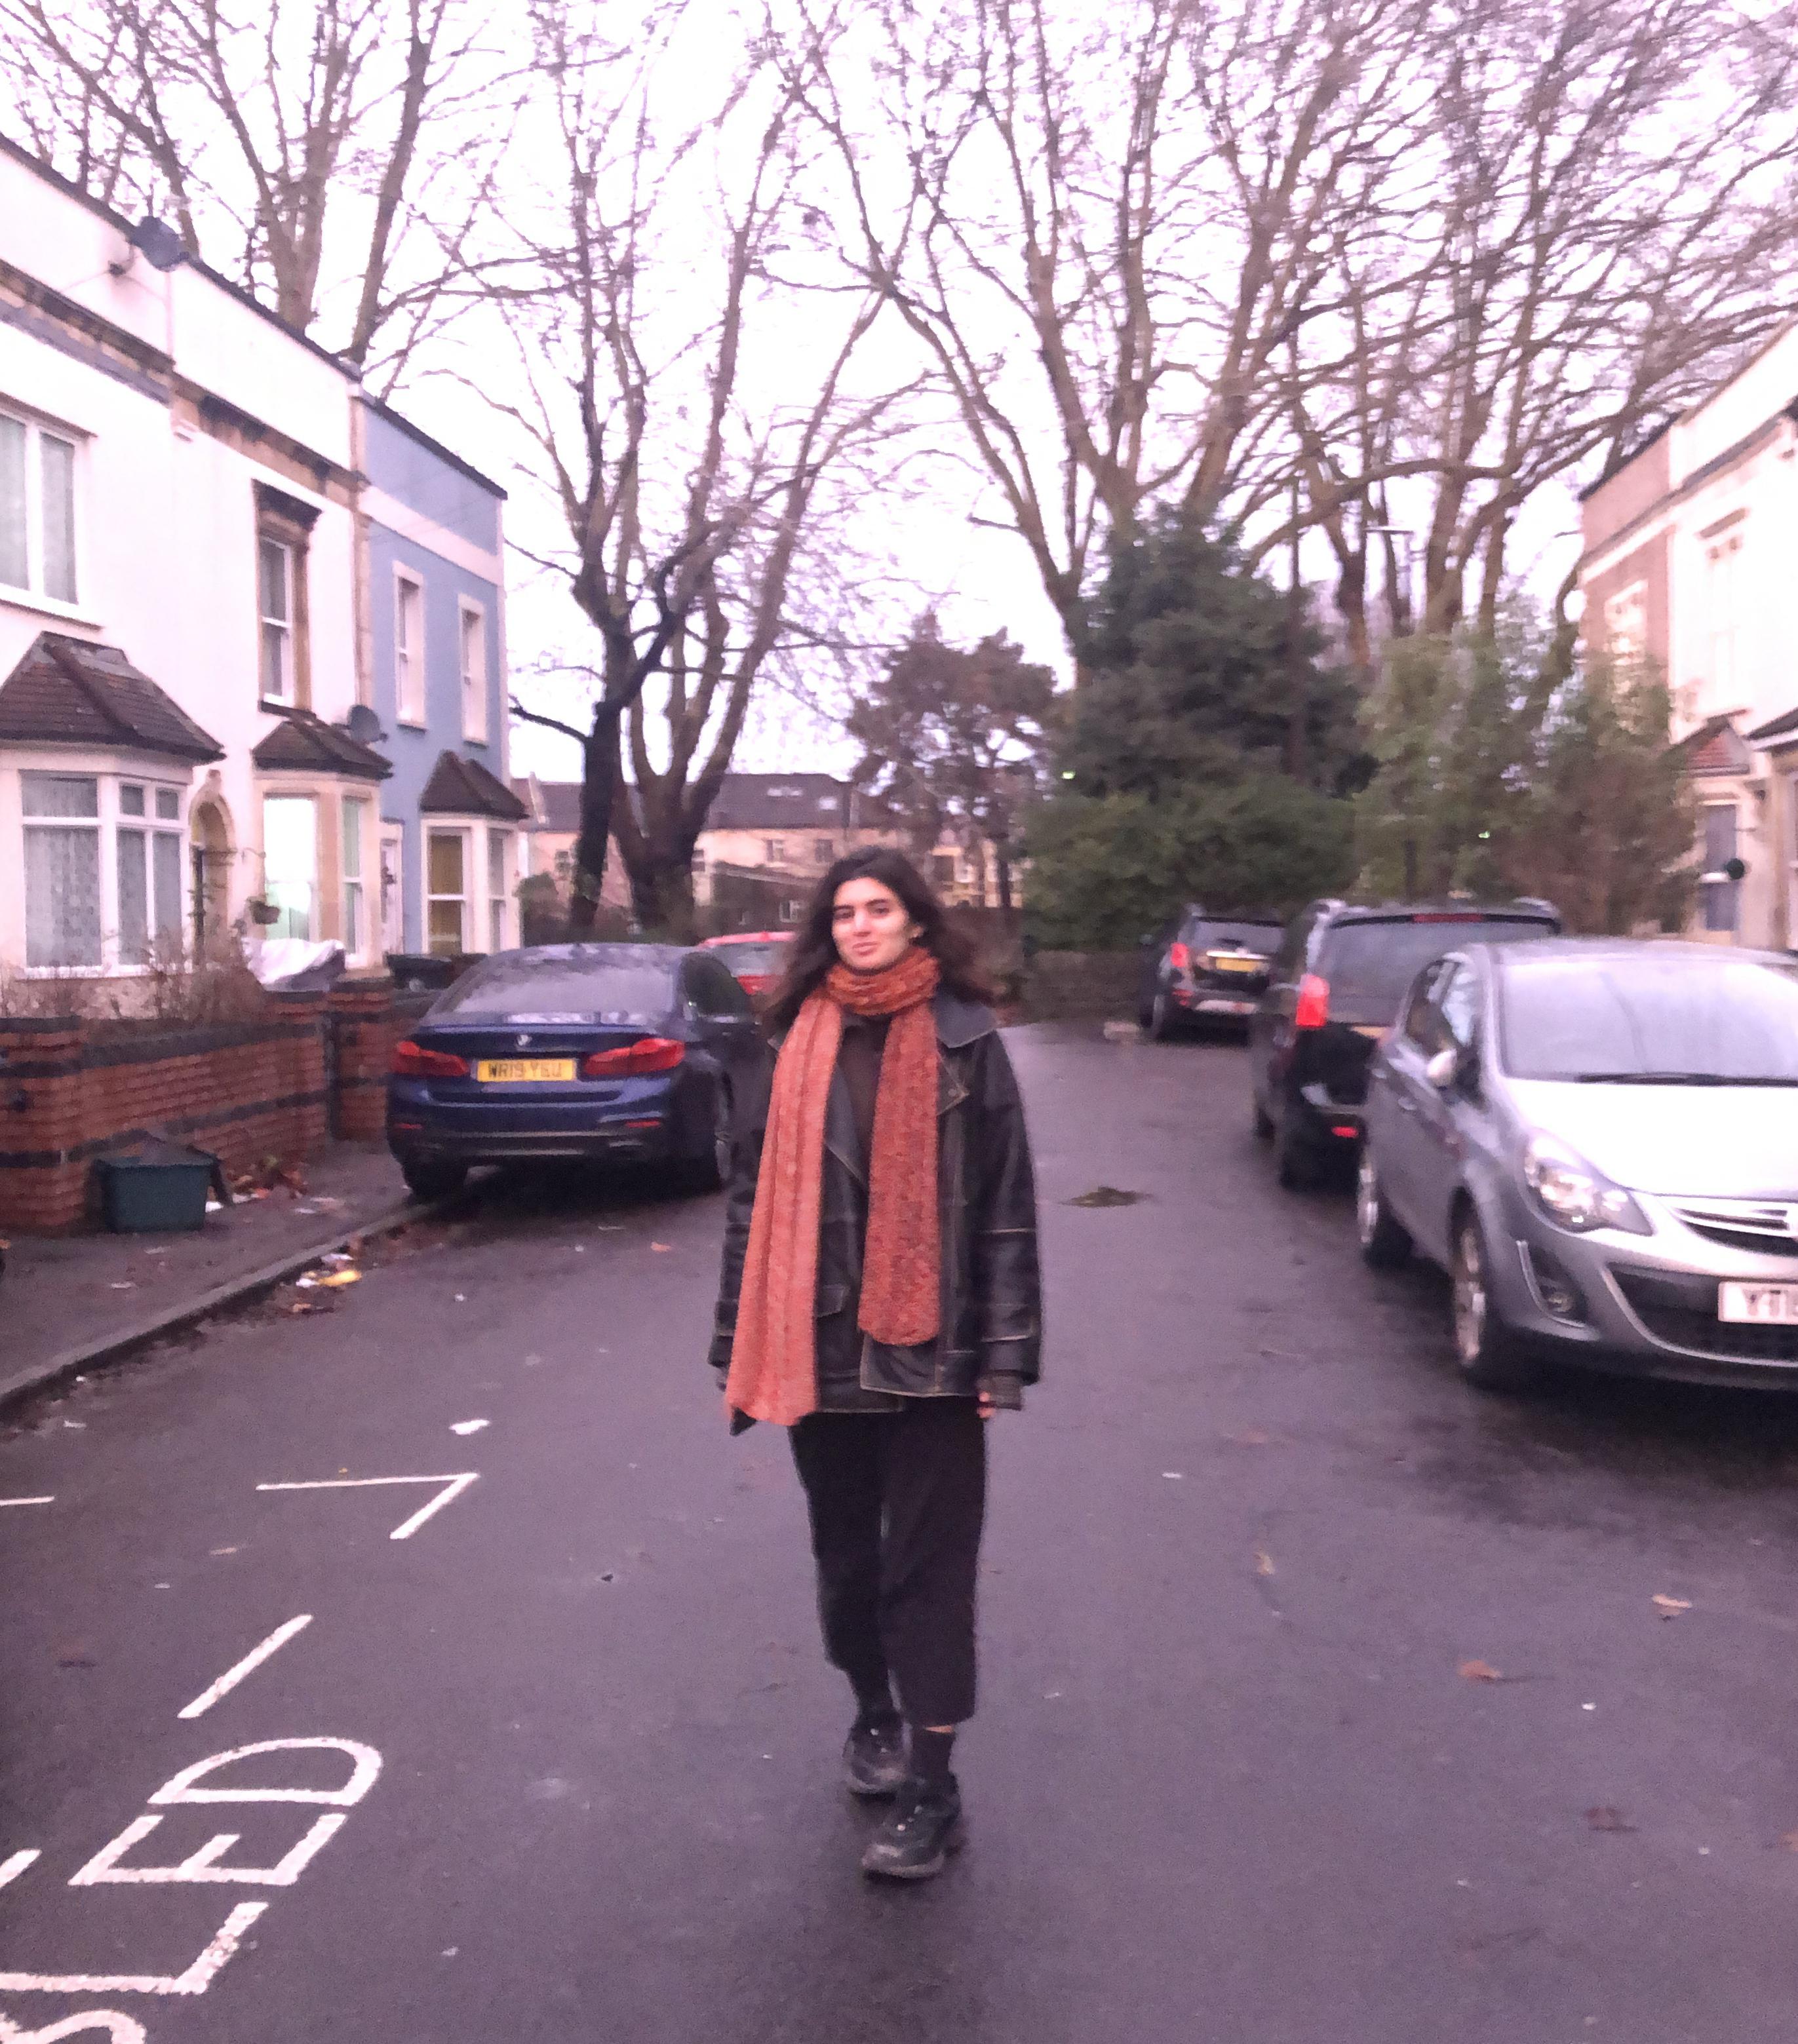 A woman stands in the middle of a suburban road